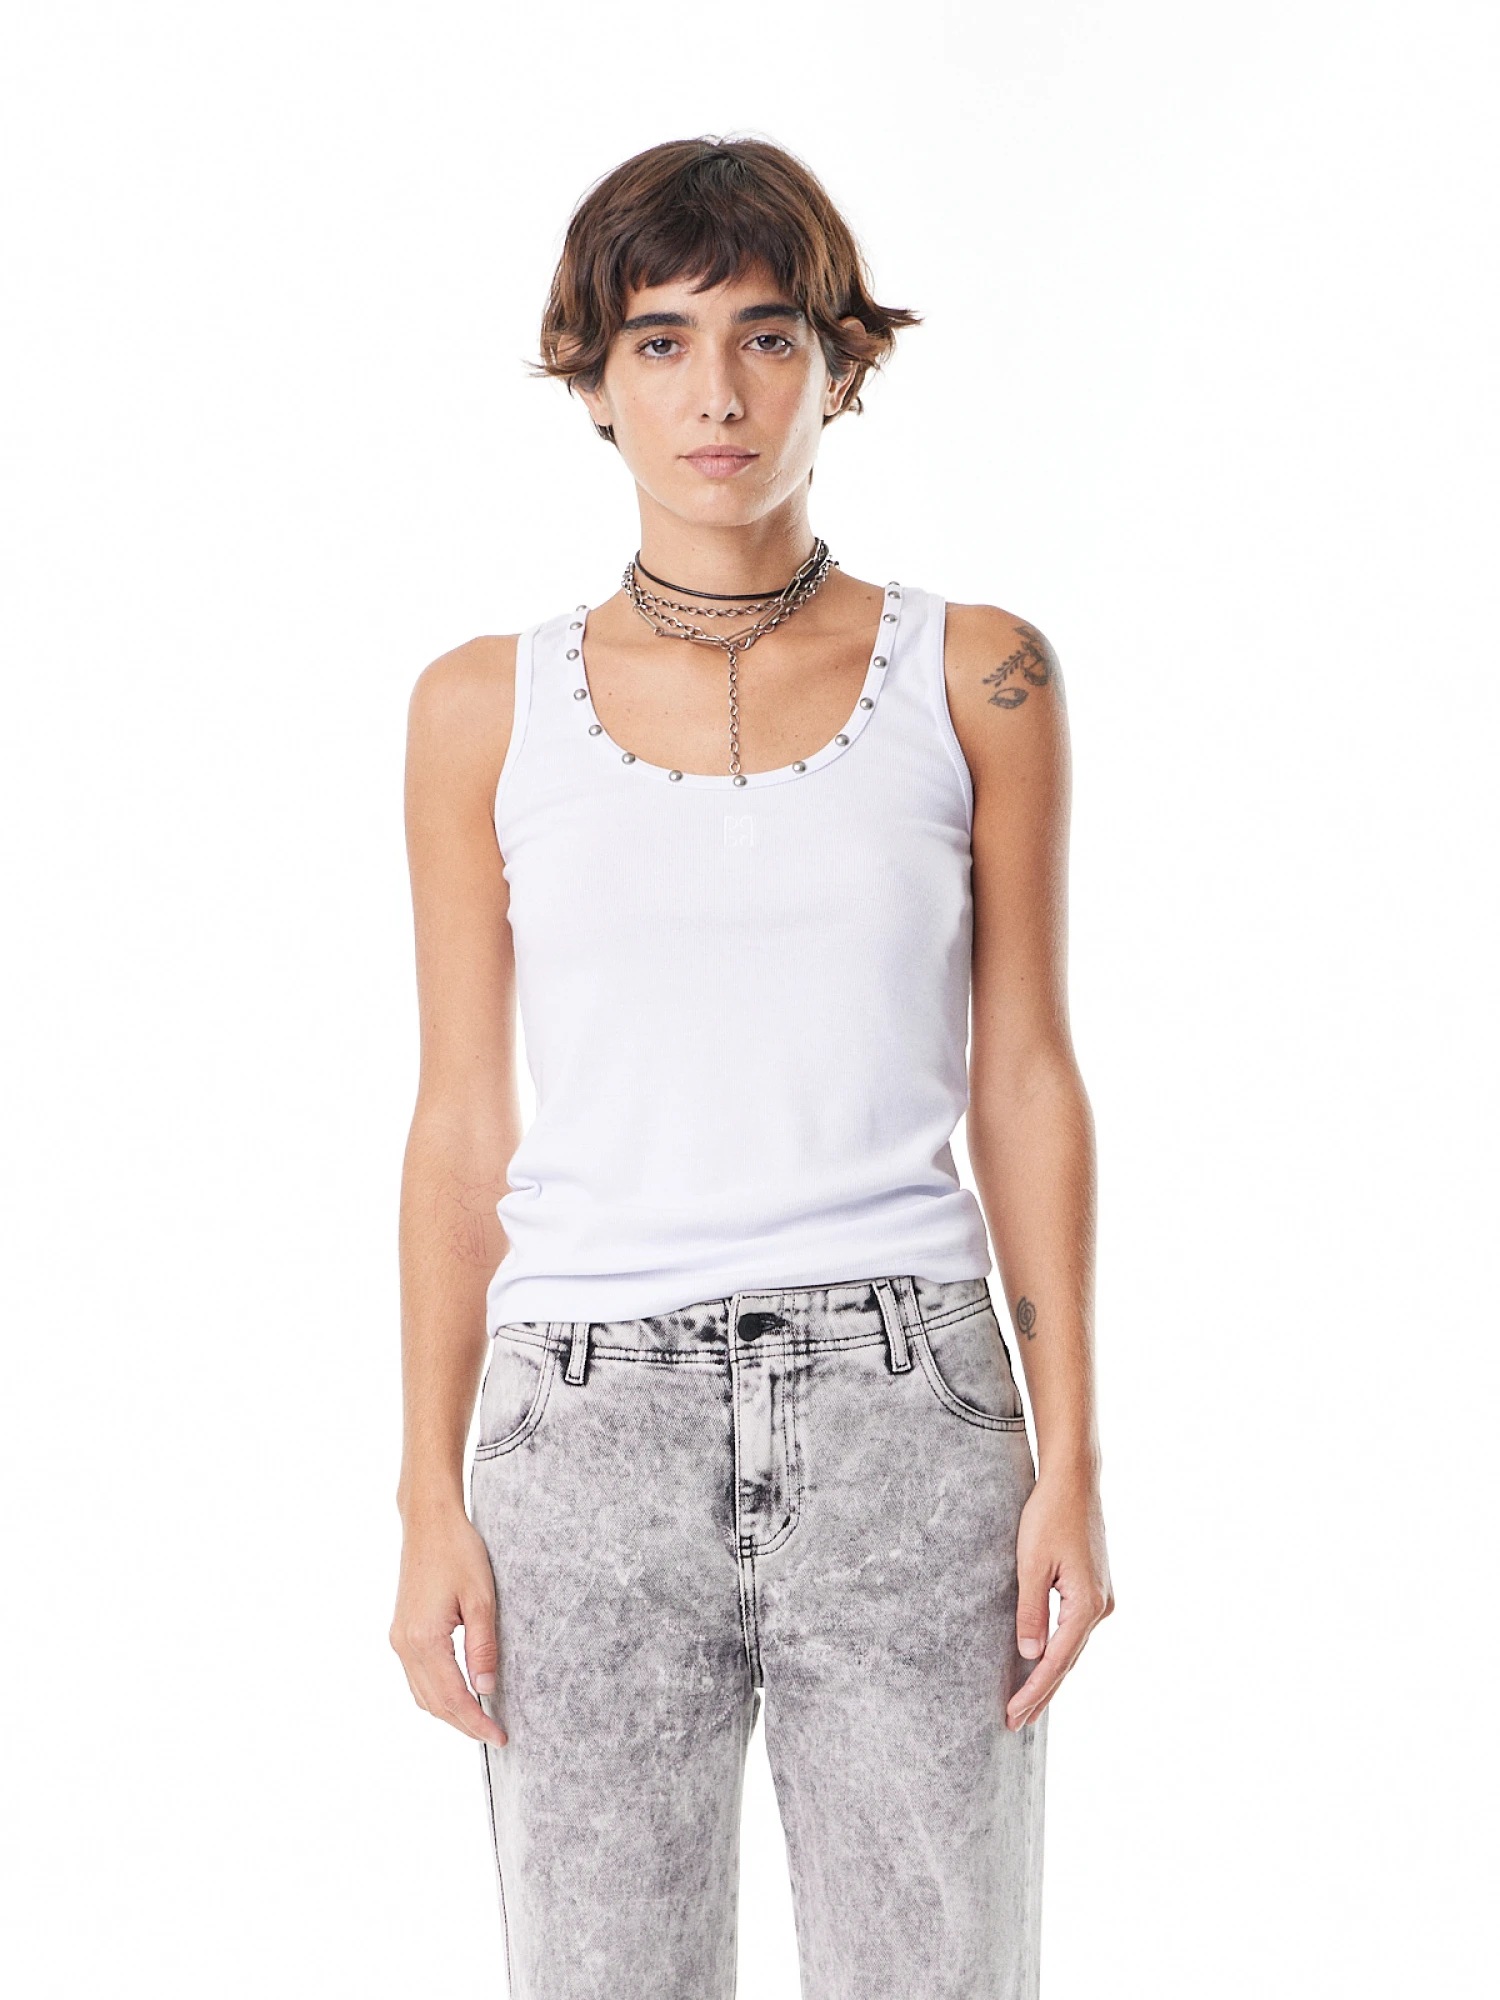 Musculosa Candy tachas blanco s